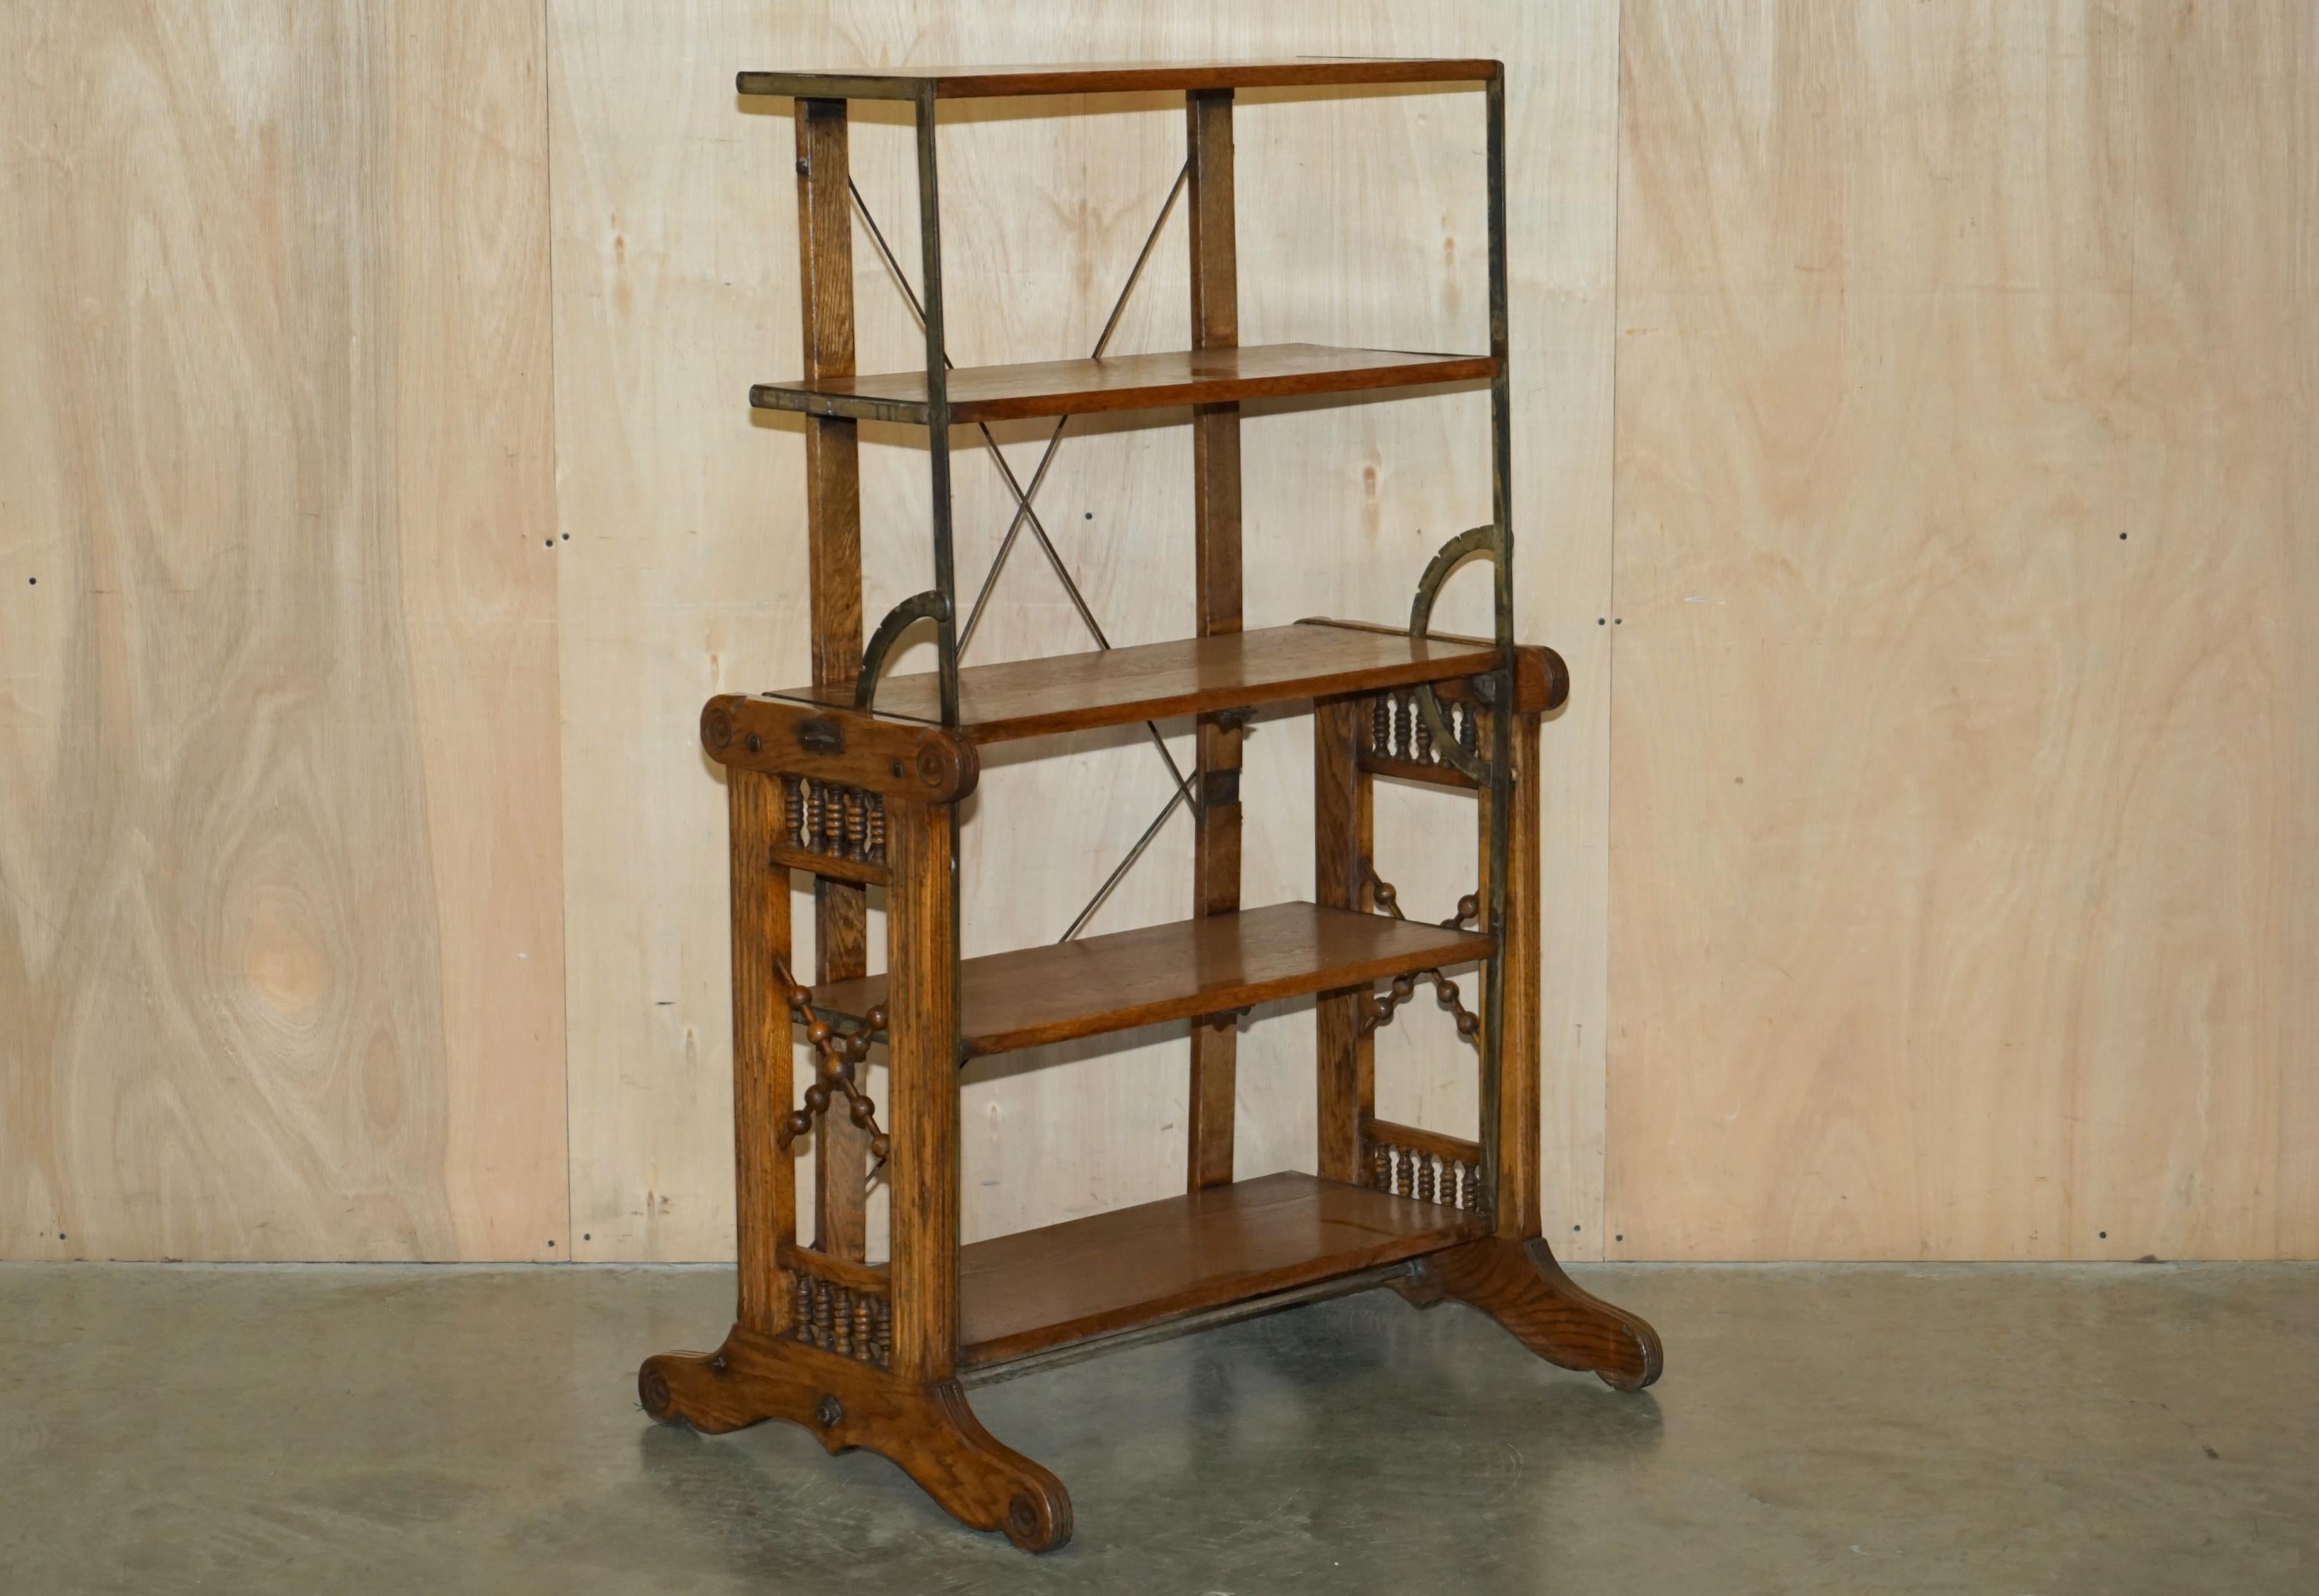 Royal House Antiques

Royal House Antiques is delighted to offer for sale this super rare and highly collectable, fully restored Boeckh Brothers LTD circa 1910-1920 metamorphic bakers shelf bookcase into a dining table 

Please note the delivery fee